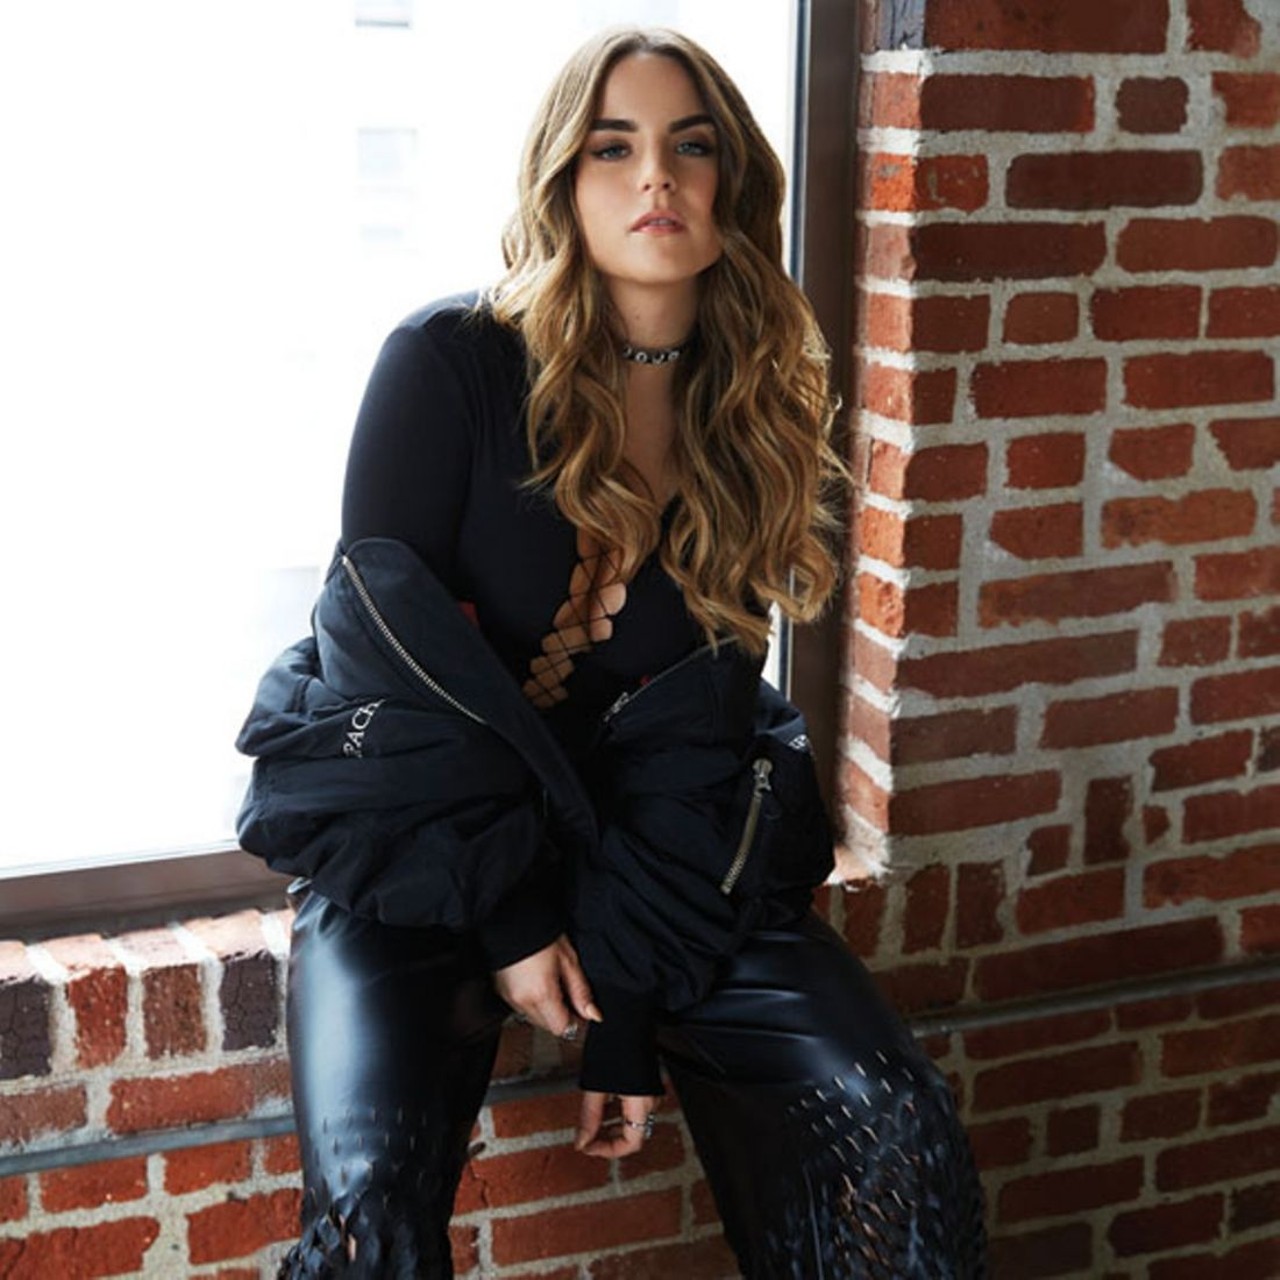 Band of the Week: JoJo 
Thursday, March 30
Photo Provided